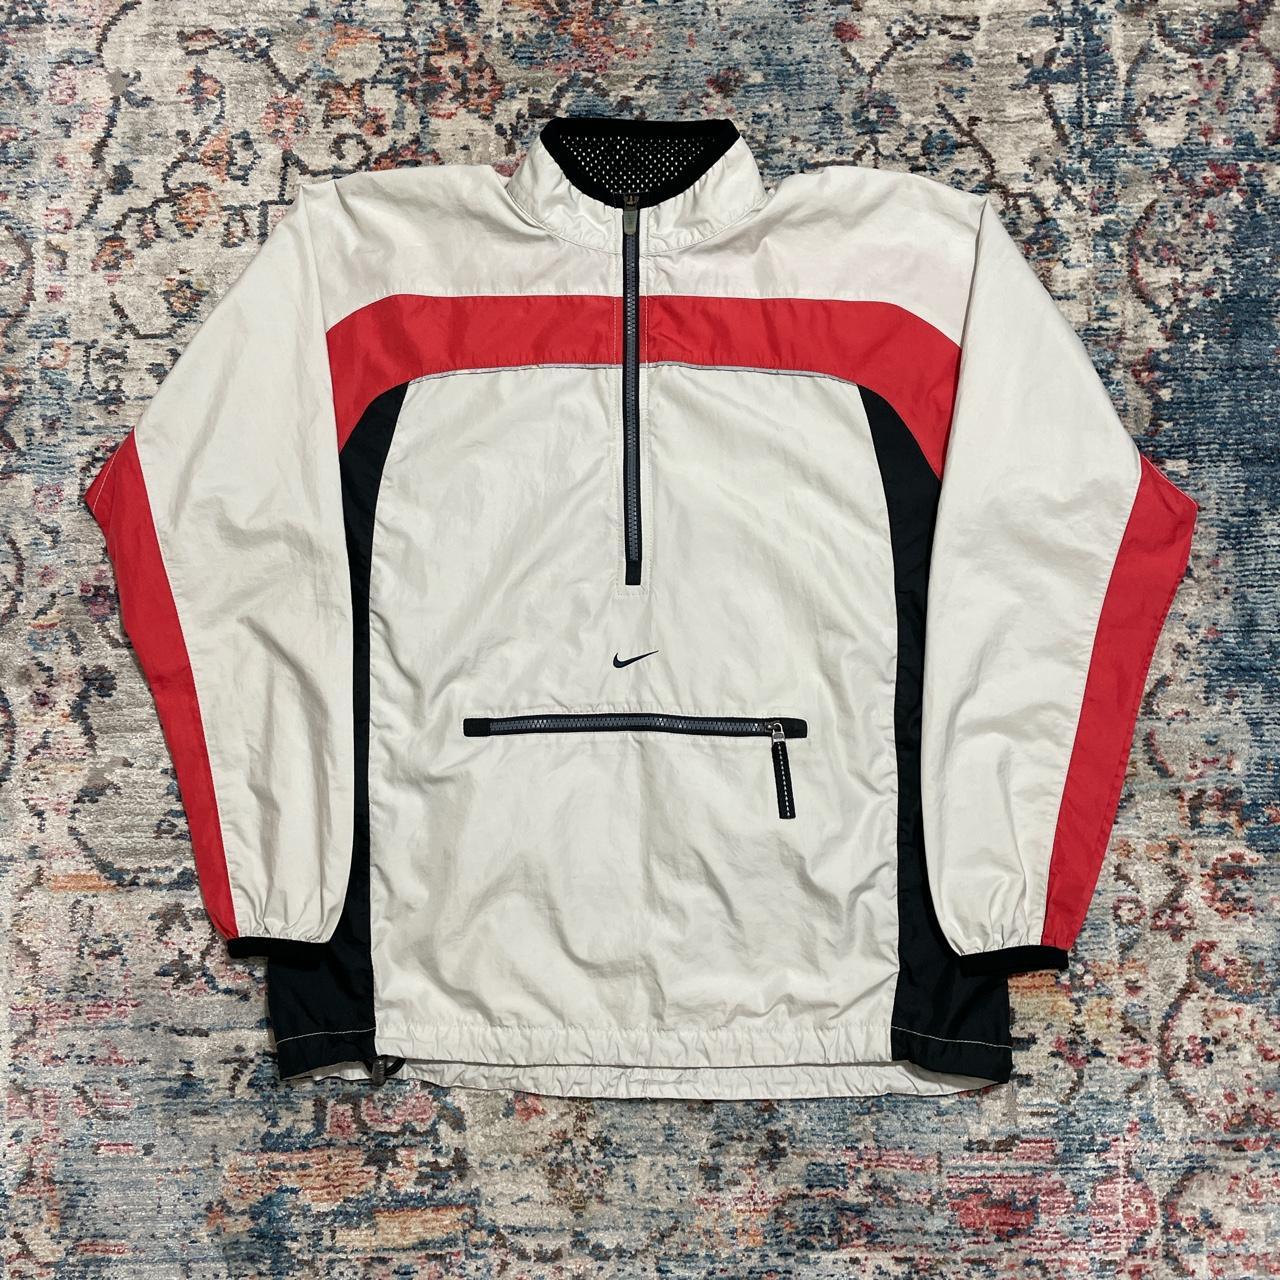 Vintage Nike White and Red Jacket